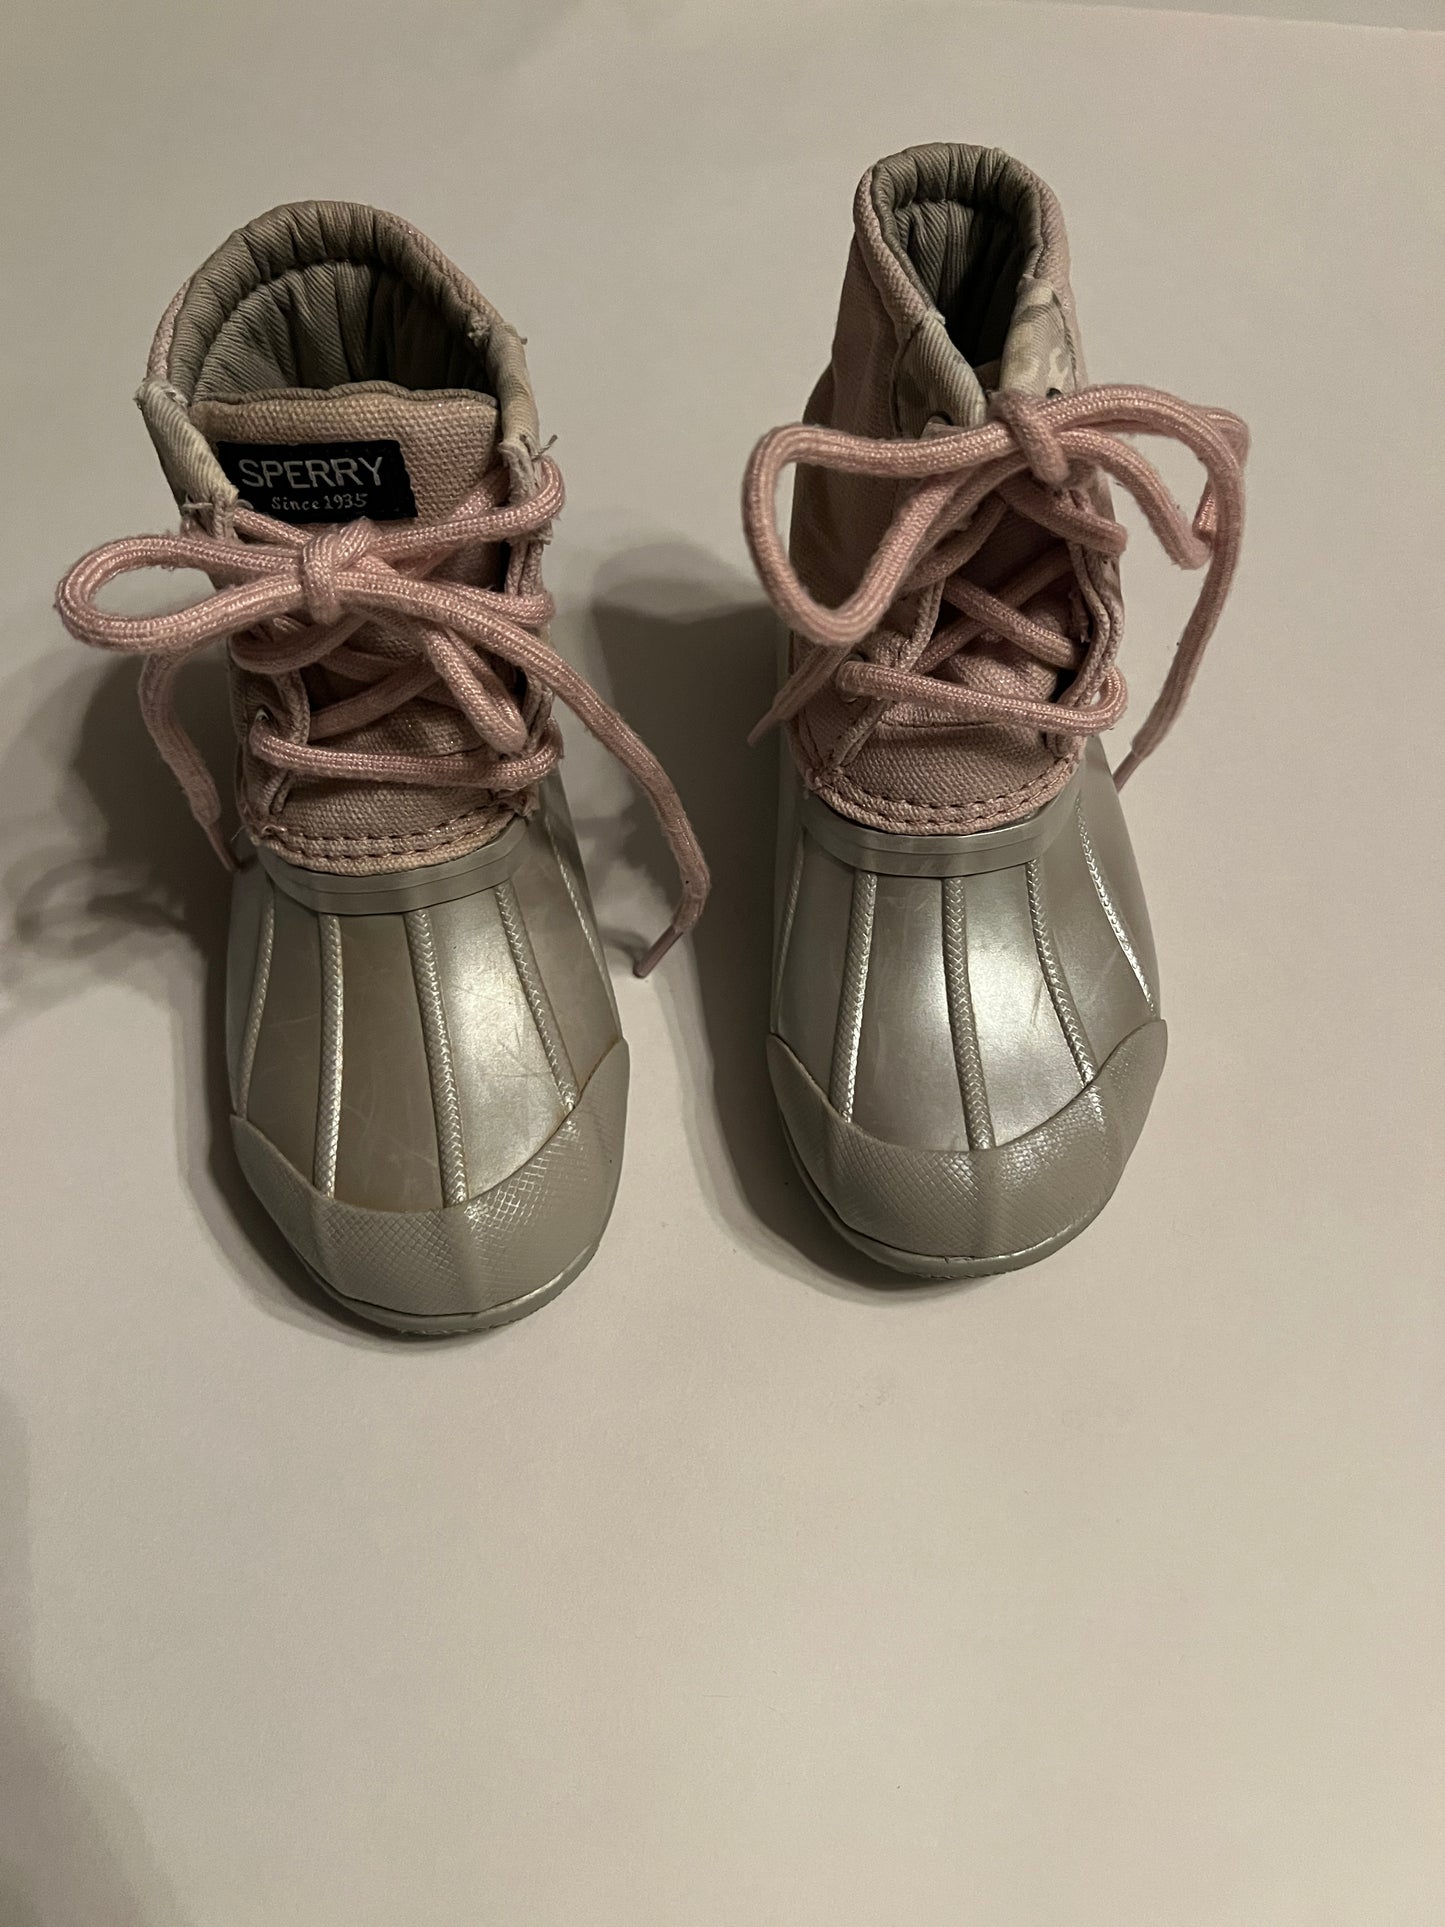 Girls Shoe 8 Pink and Silver Sperry Duck Boots With Pink Laces